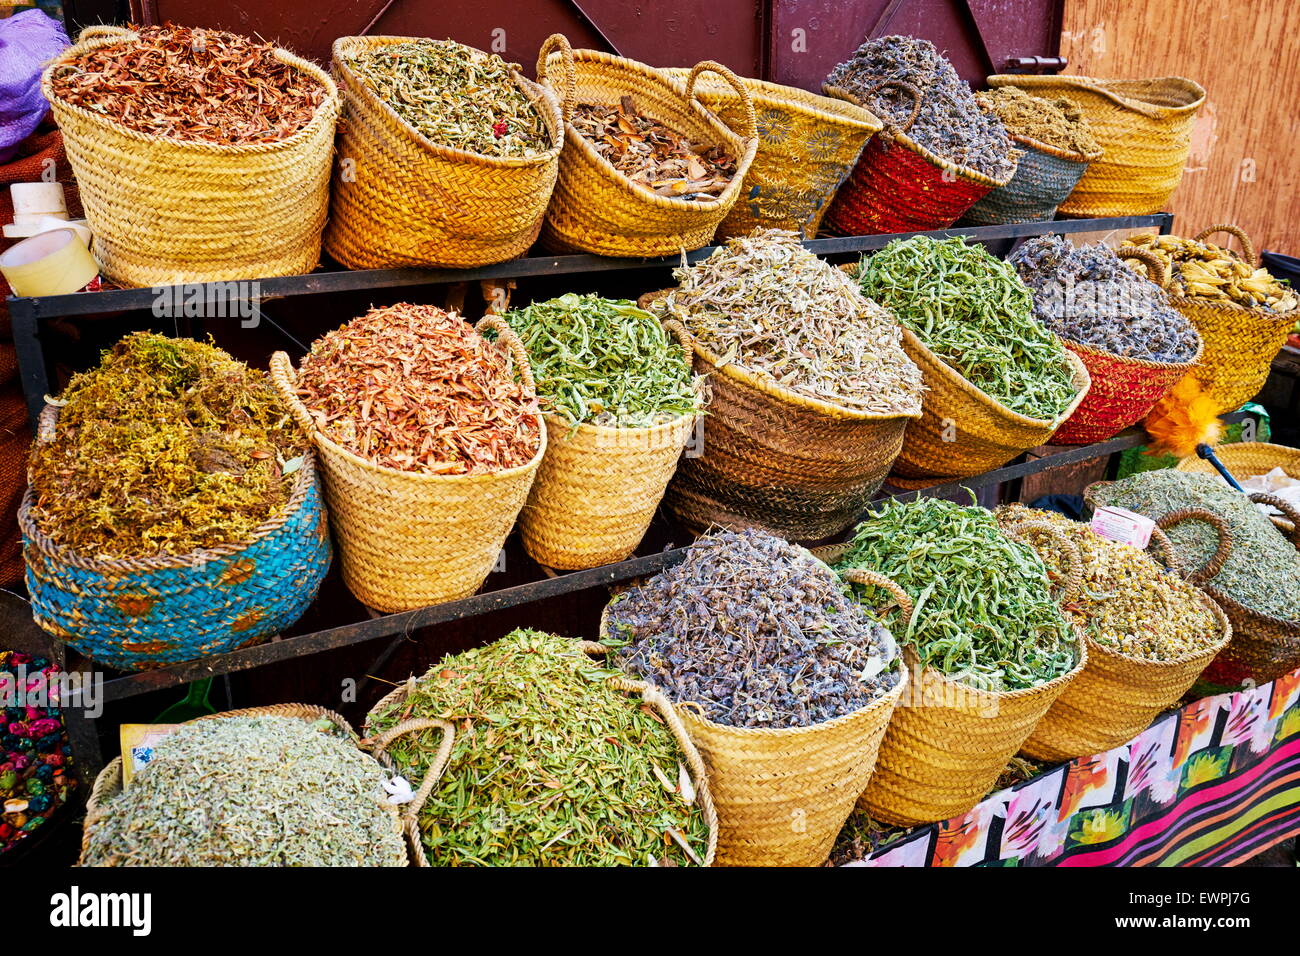 Traditional local herbs and spices, Morocco, Africa Stock Photo